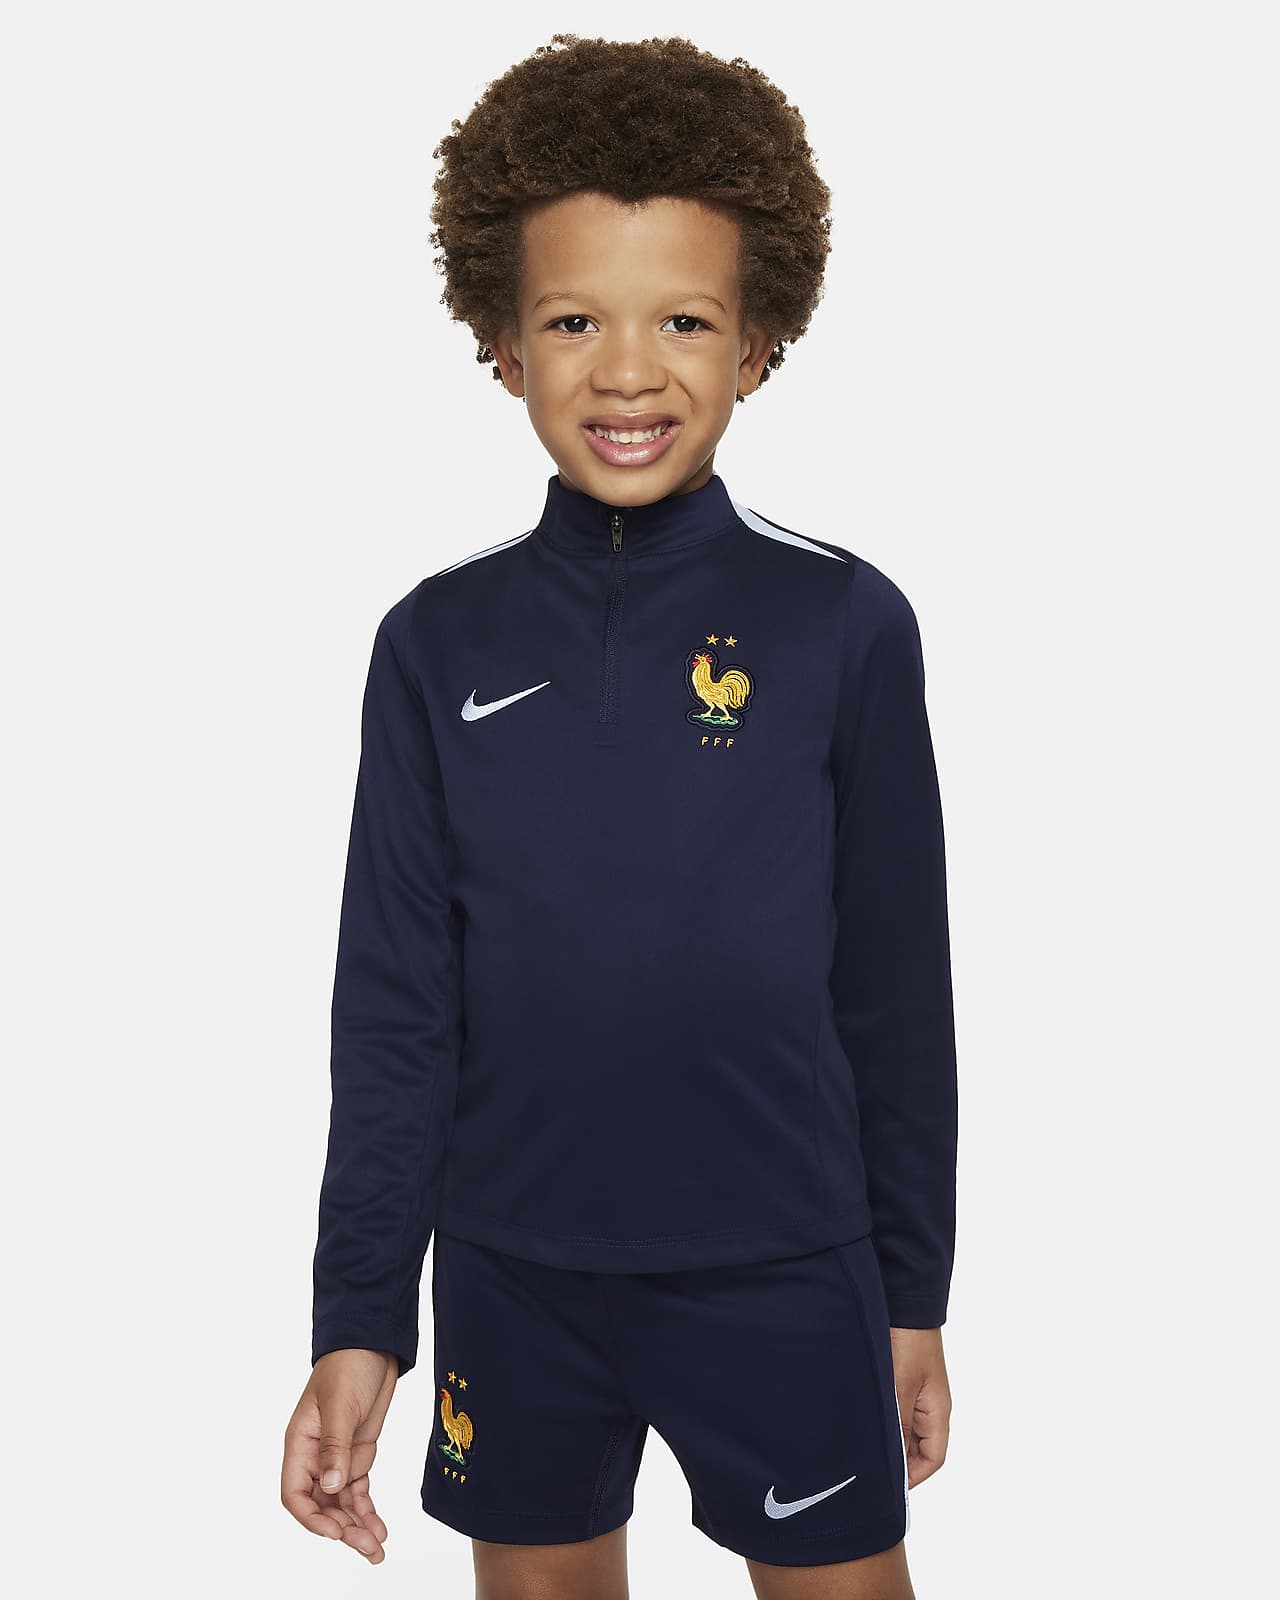 FFF Academy Pro Younger Kids' Nike Dri-FIT Football Drill Top